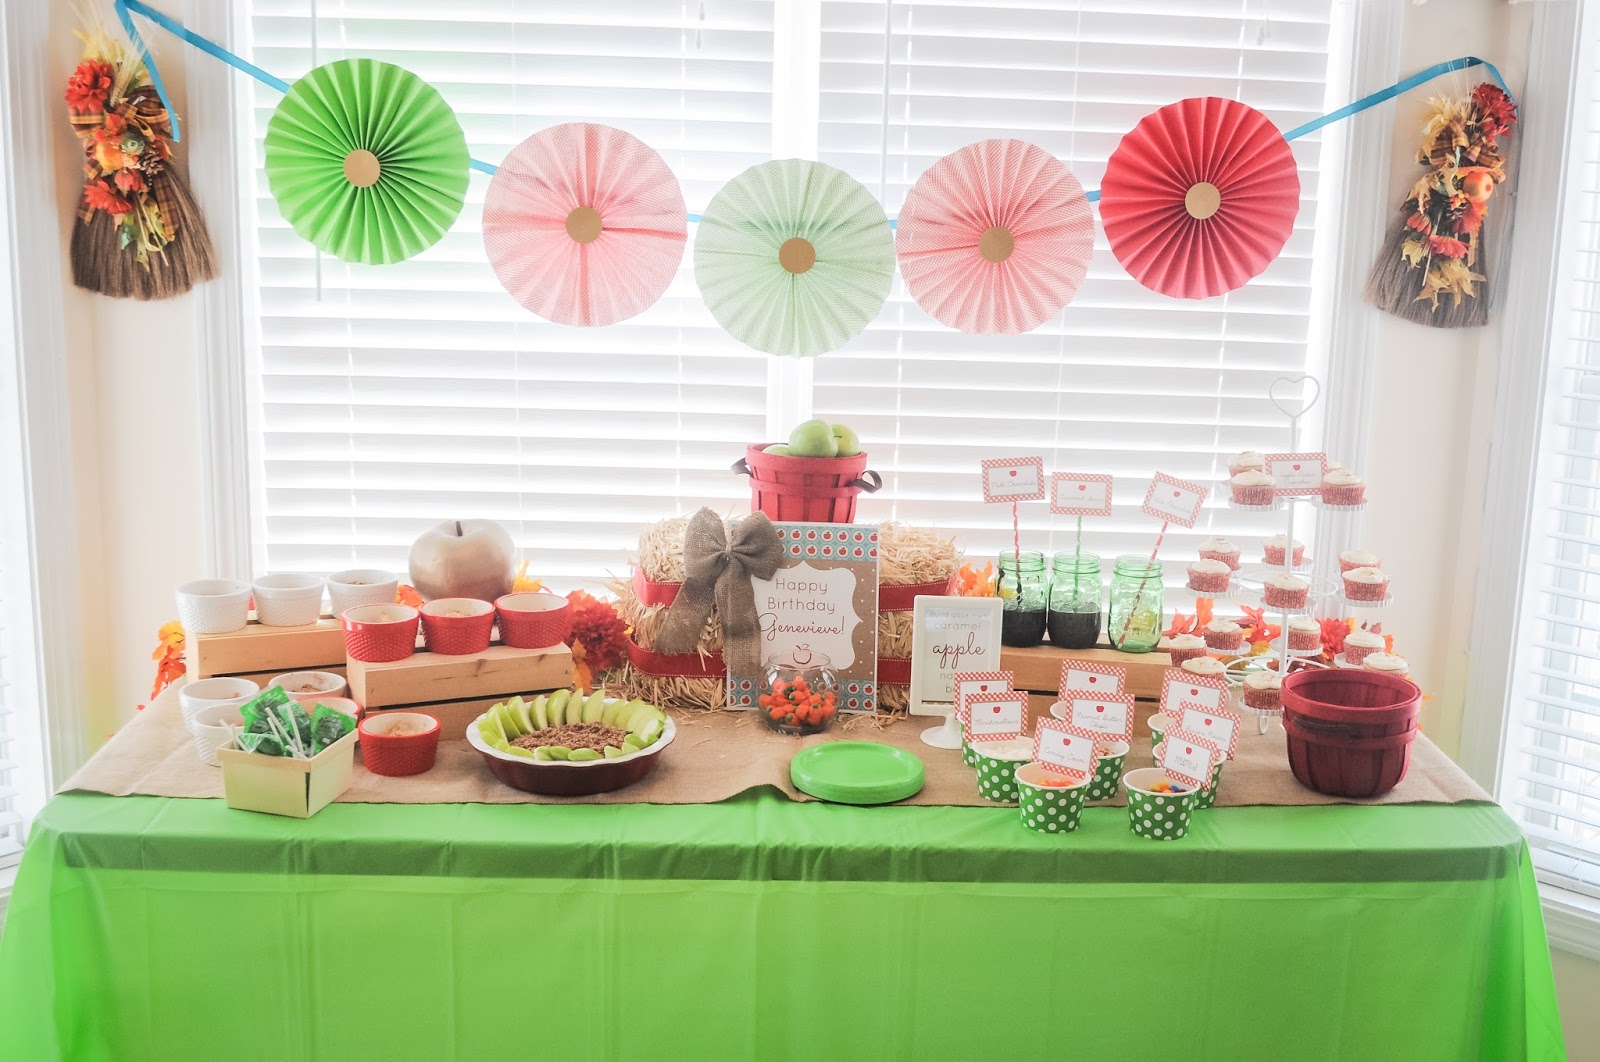 Genevieve s Apple Themed Birthday Party  plus a Handy 